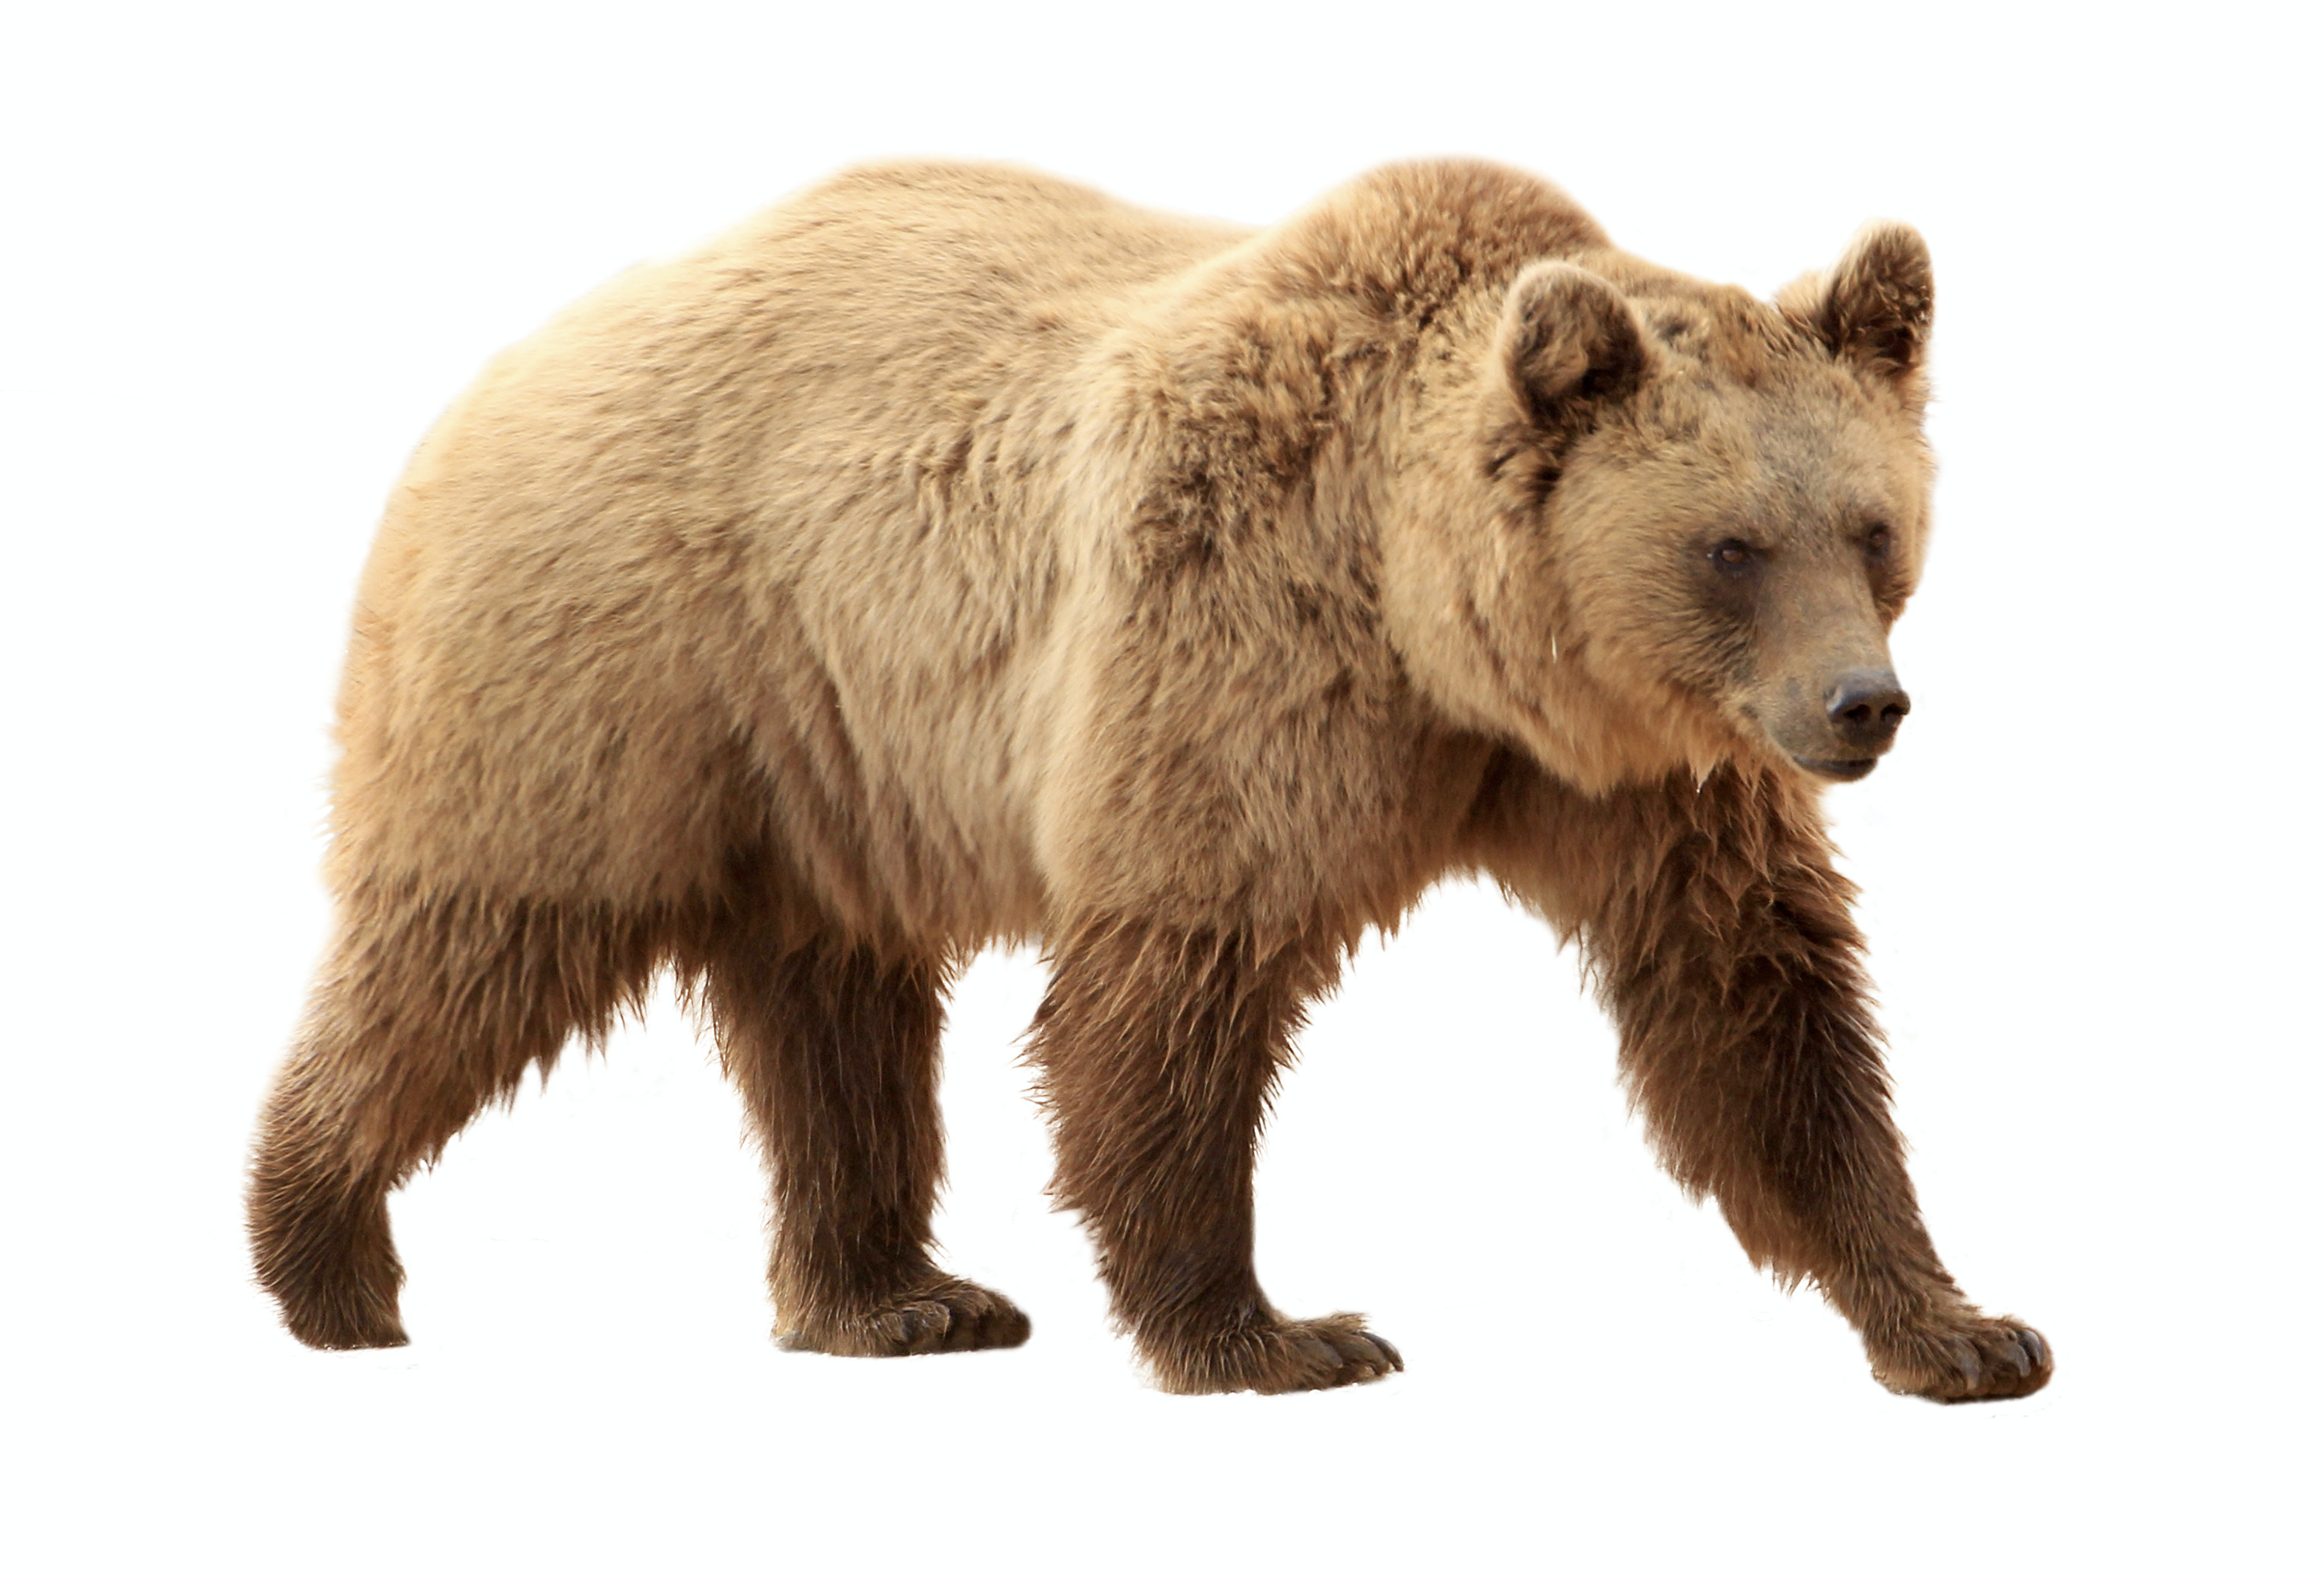 The Grizzly Bear, the California state land mammal